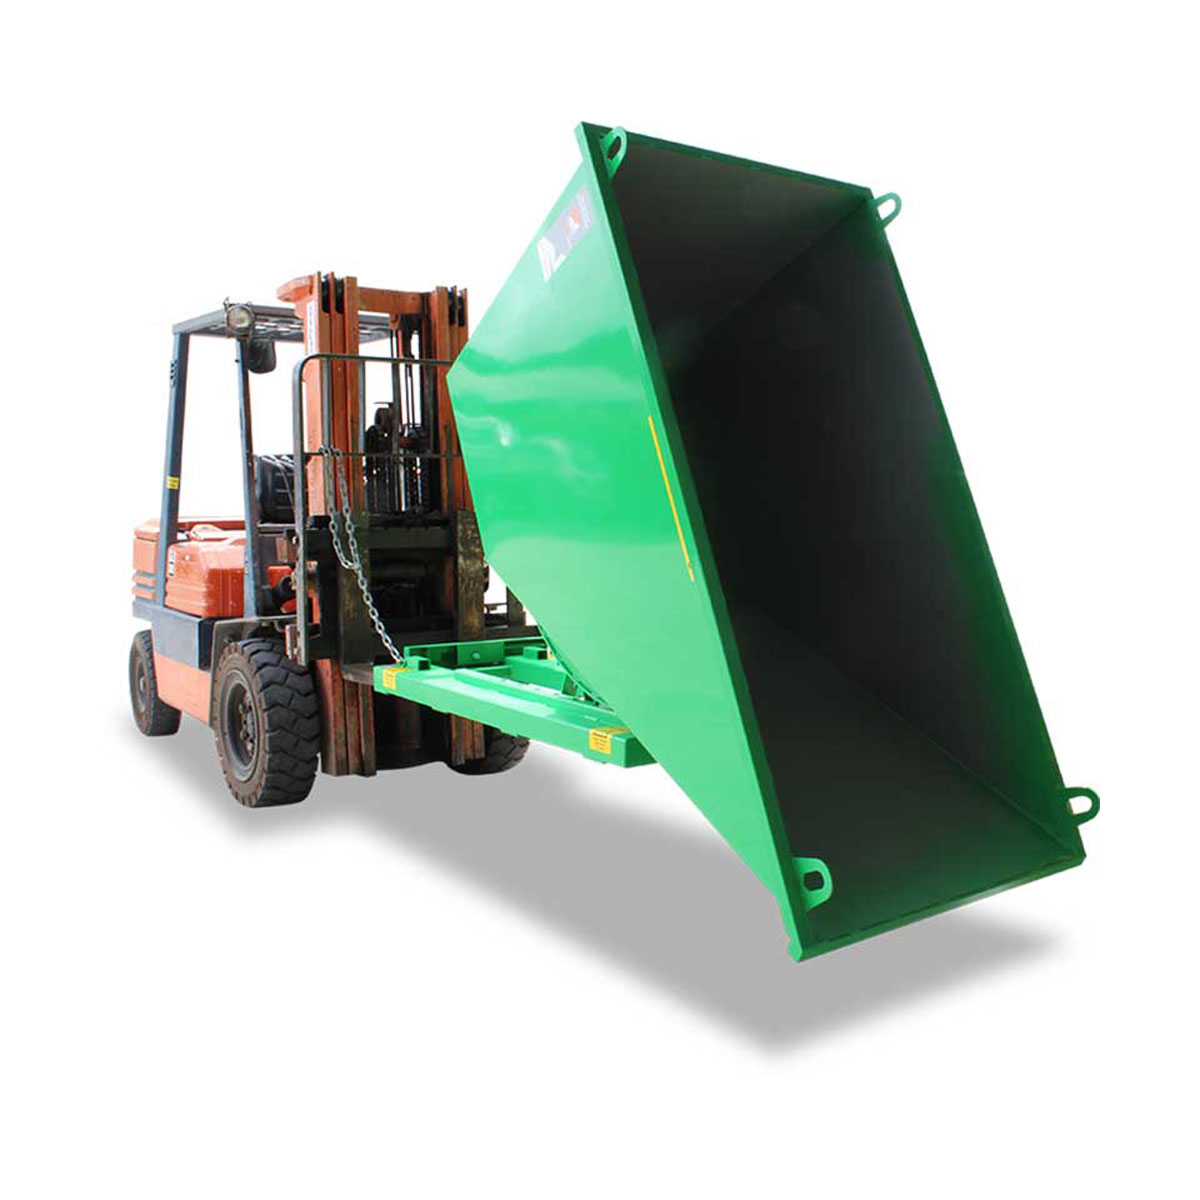 Buy Hopper - Self-tipping Forklift Attachment in Waste Management  from Astrolift NZ